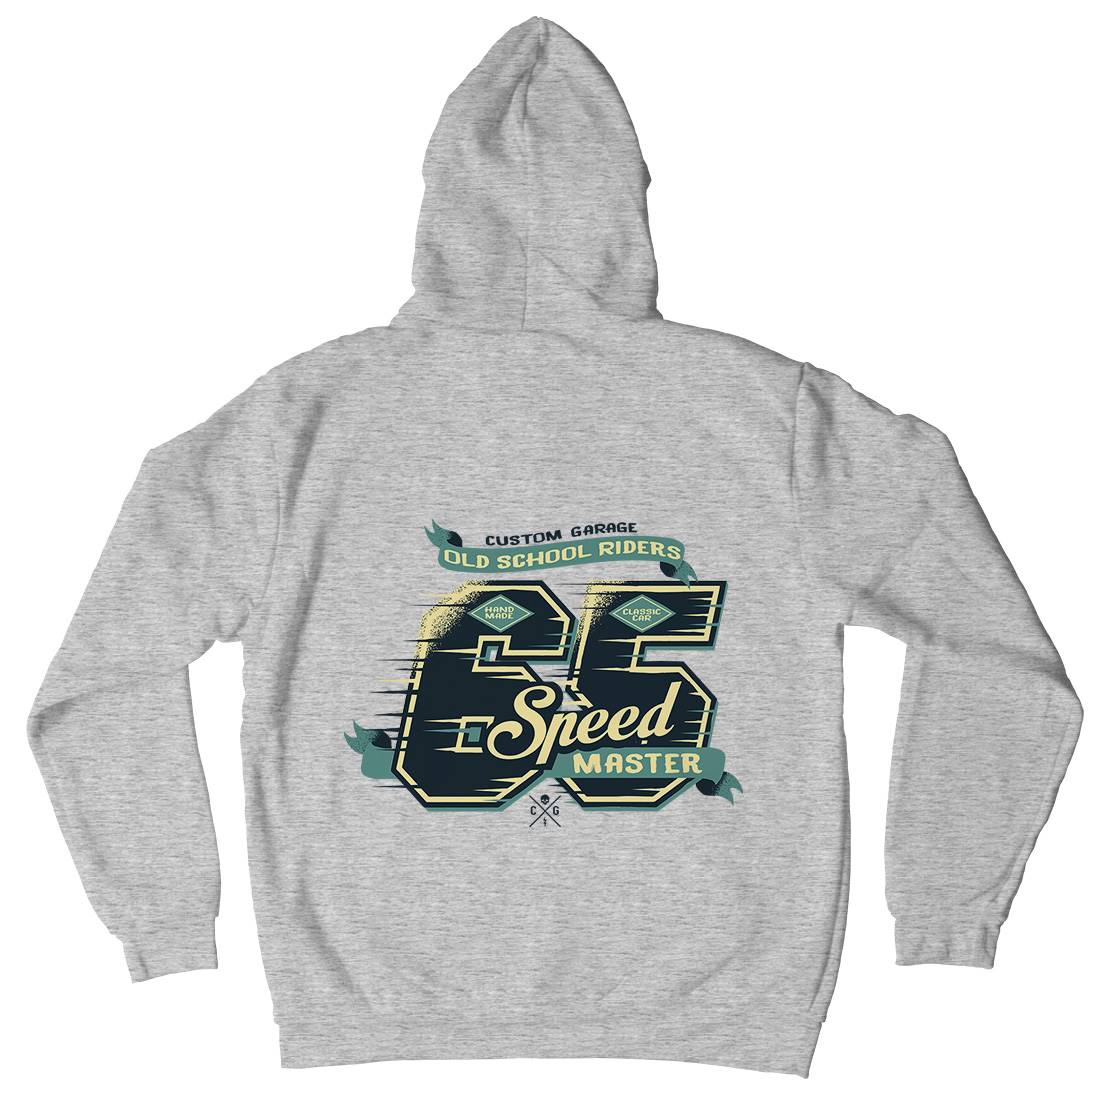 65 Speed Mens Hoodie With Pocket Motorcycles A982